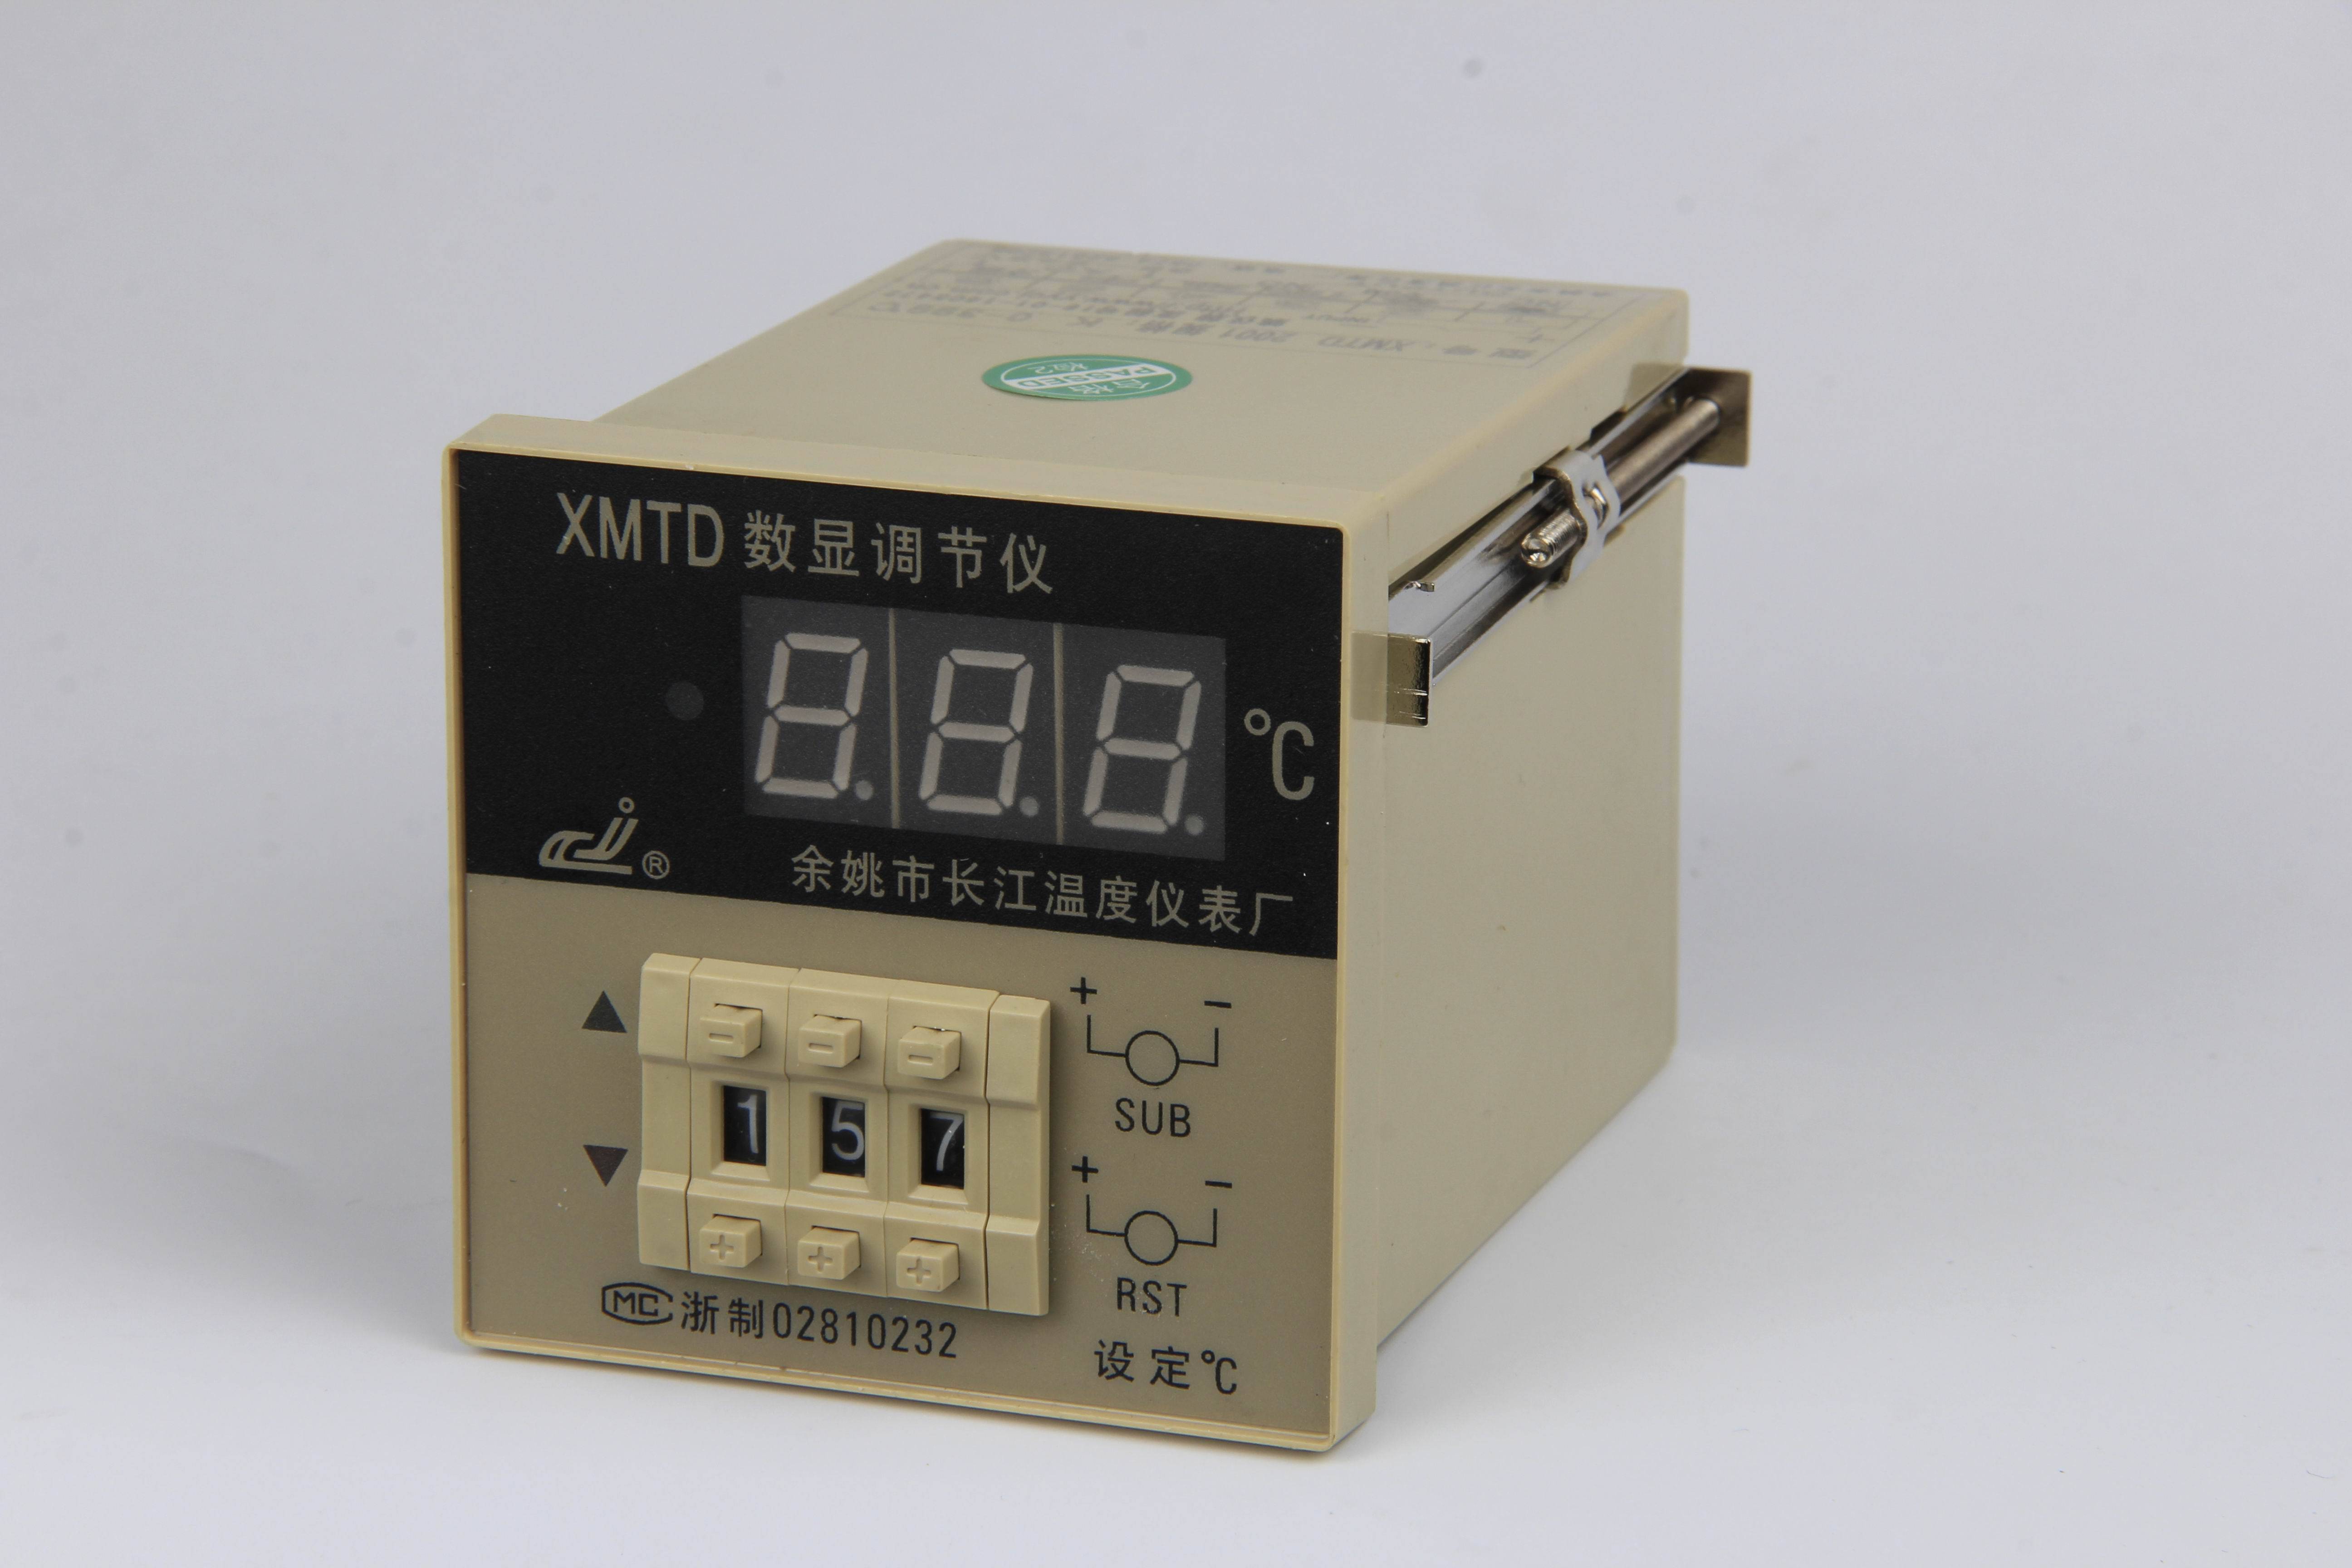 Details about   XMT-8000 XMT-8411 XMT-8511 Intelligent Temperature Controller Thermostat 